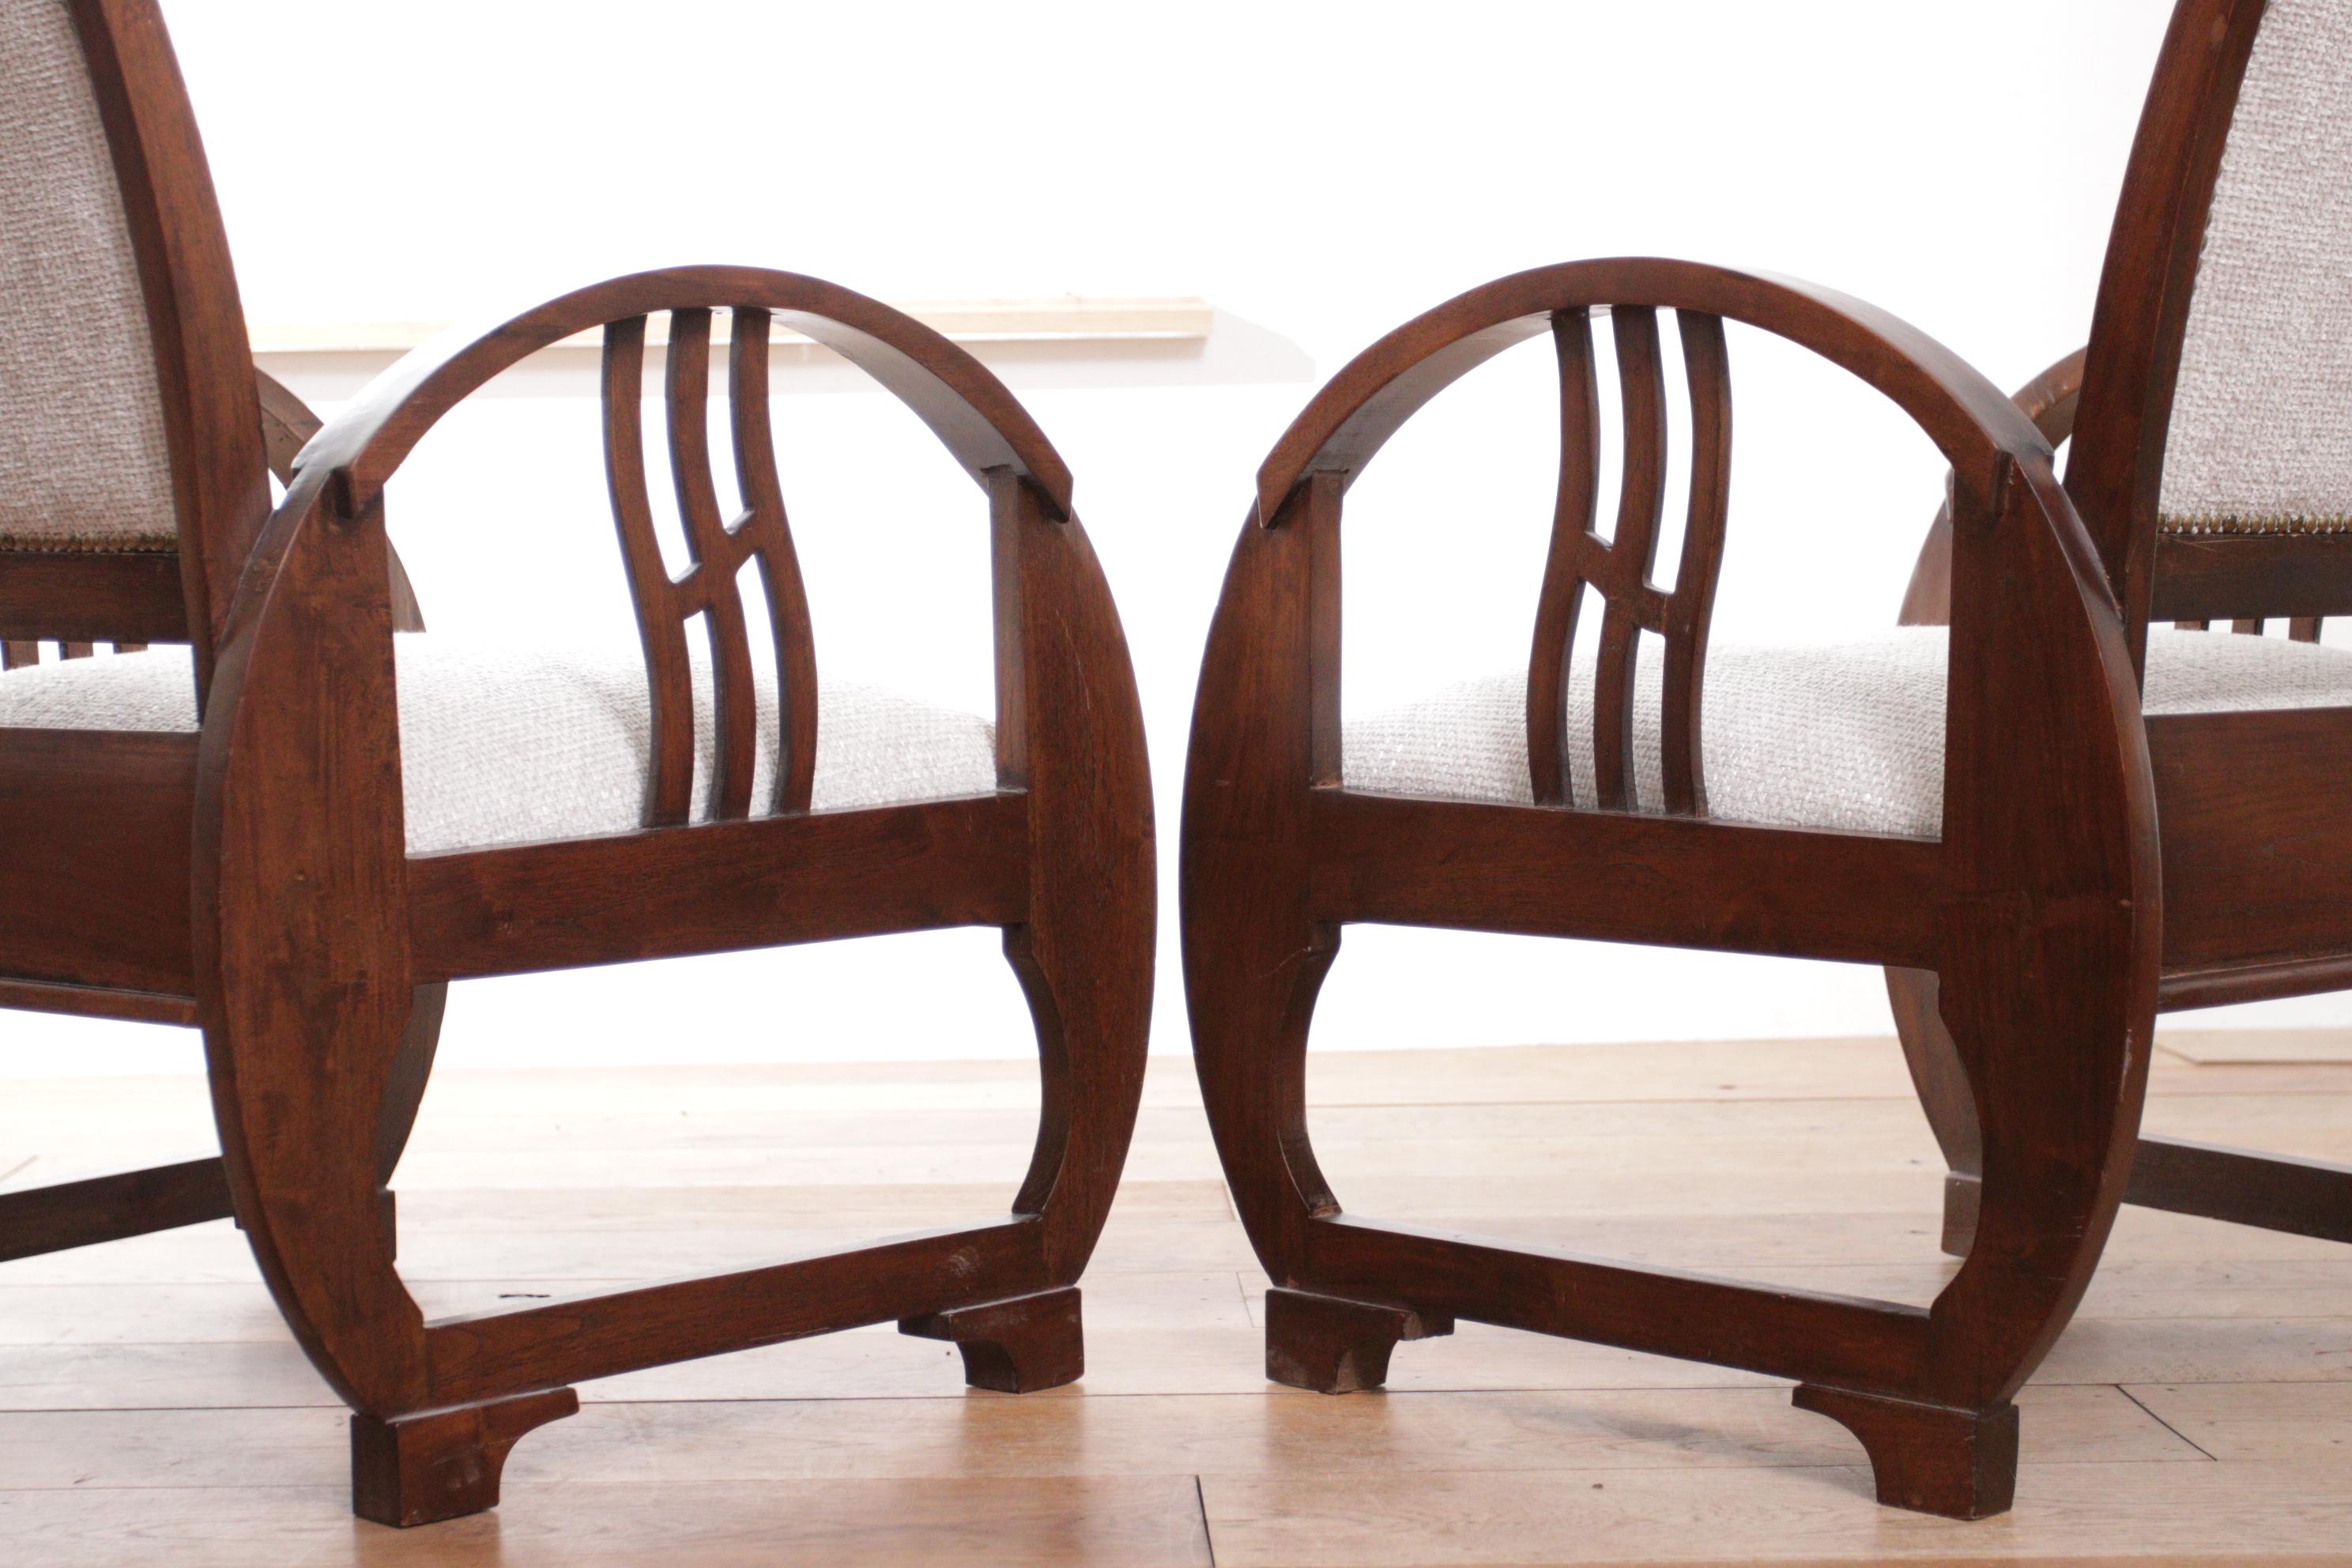 Two Rare Exclusive Elegant Art Deco Vintage French Wooden Armchairs 1930's For Sale 8